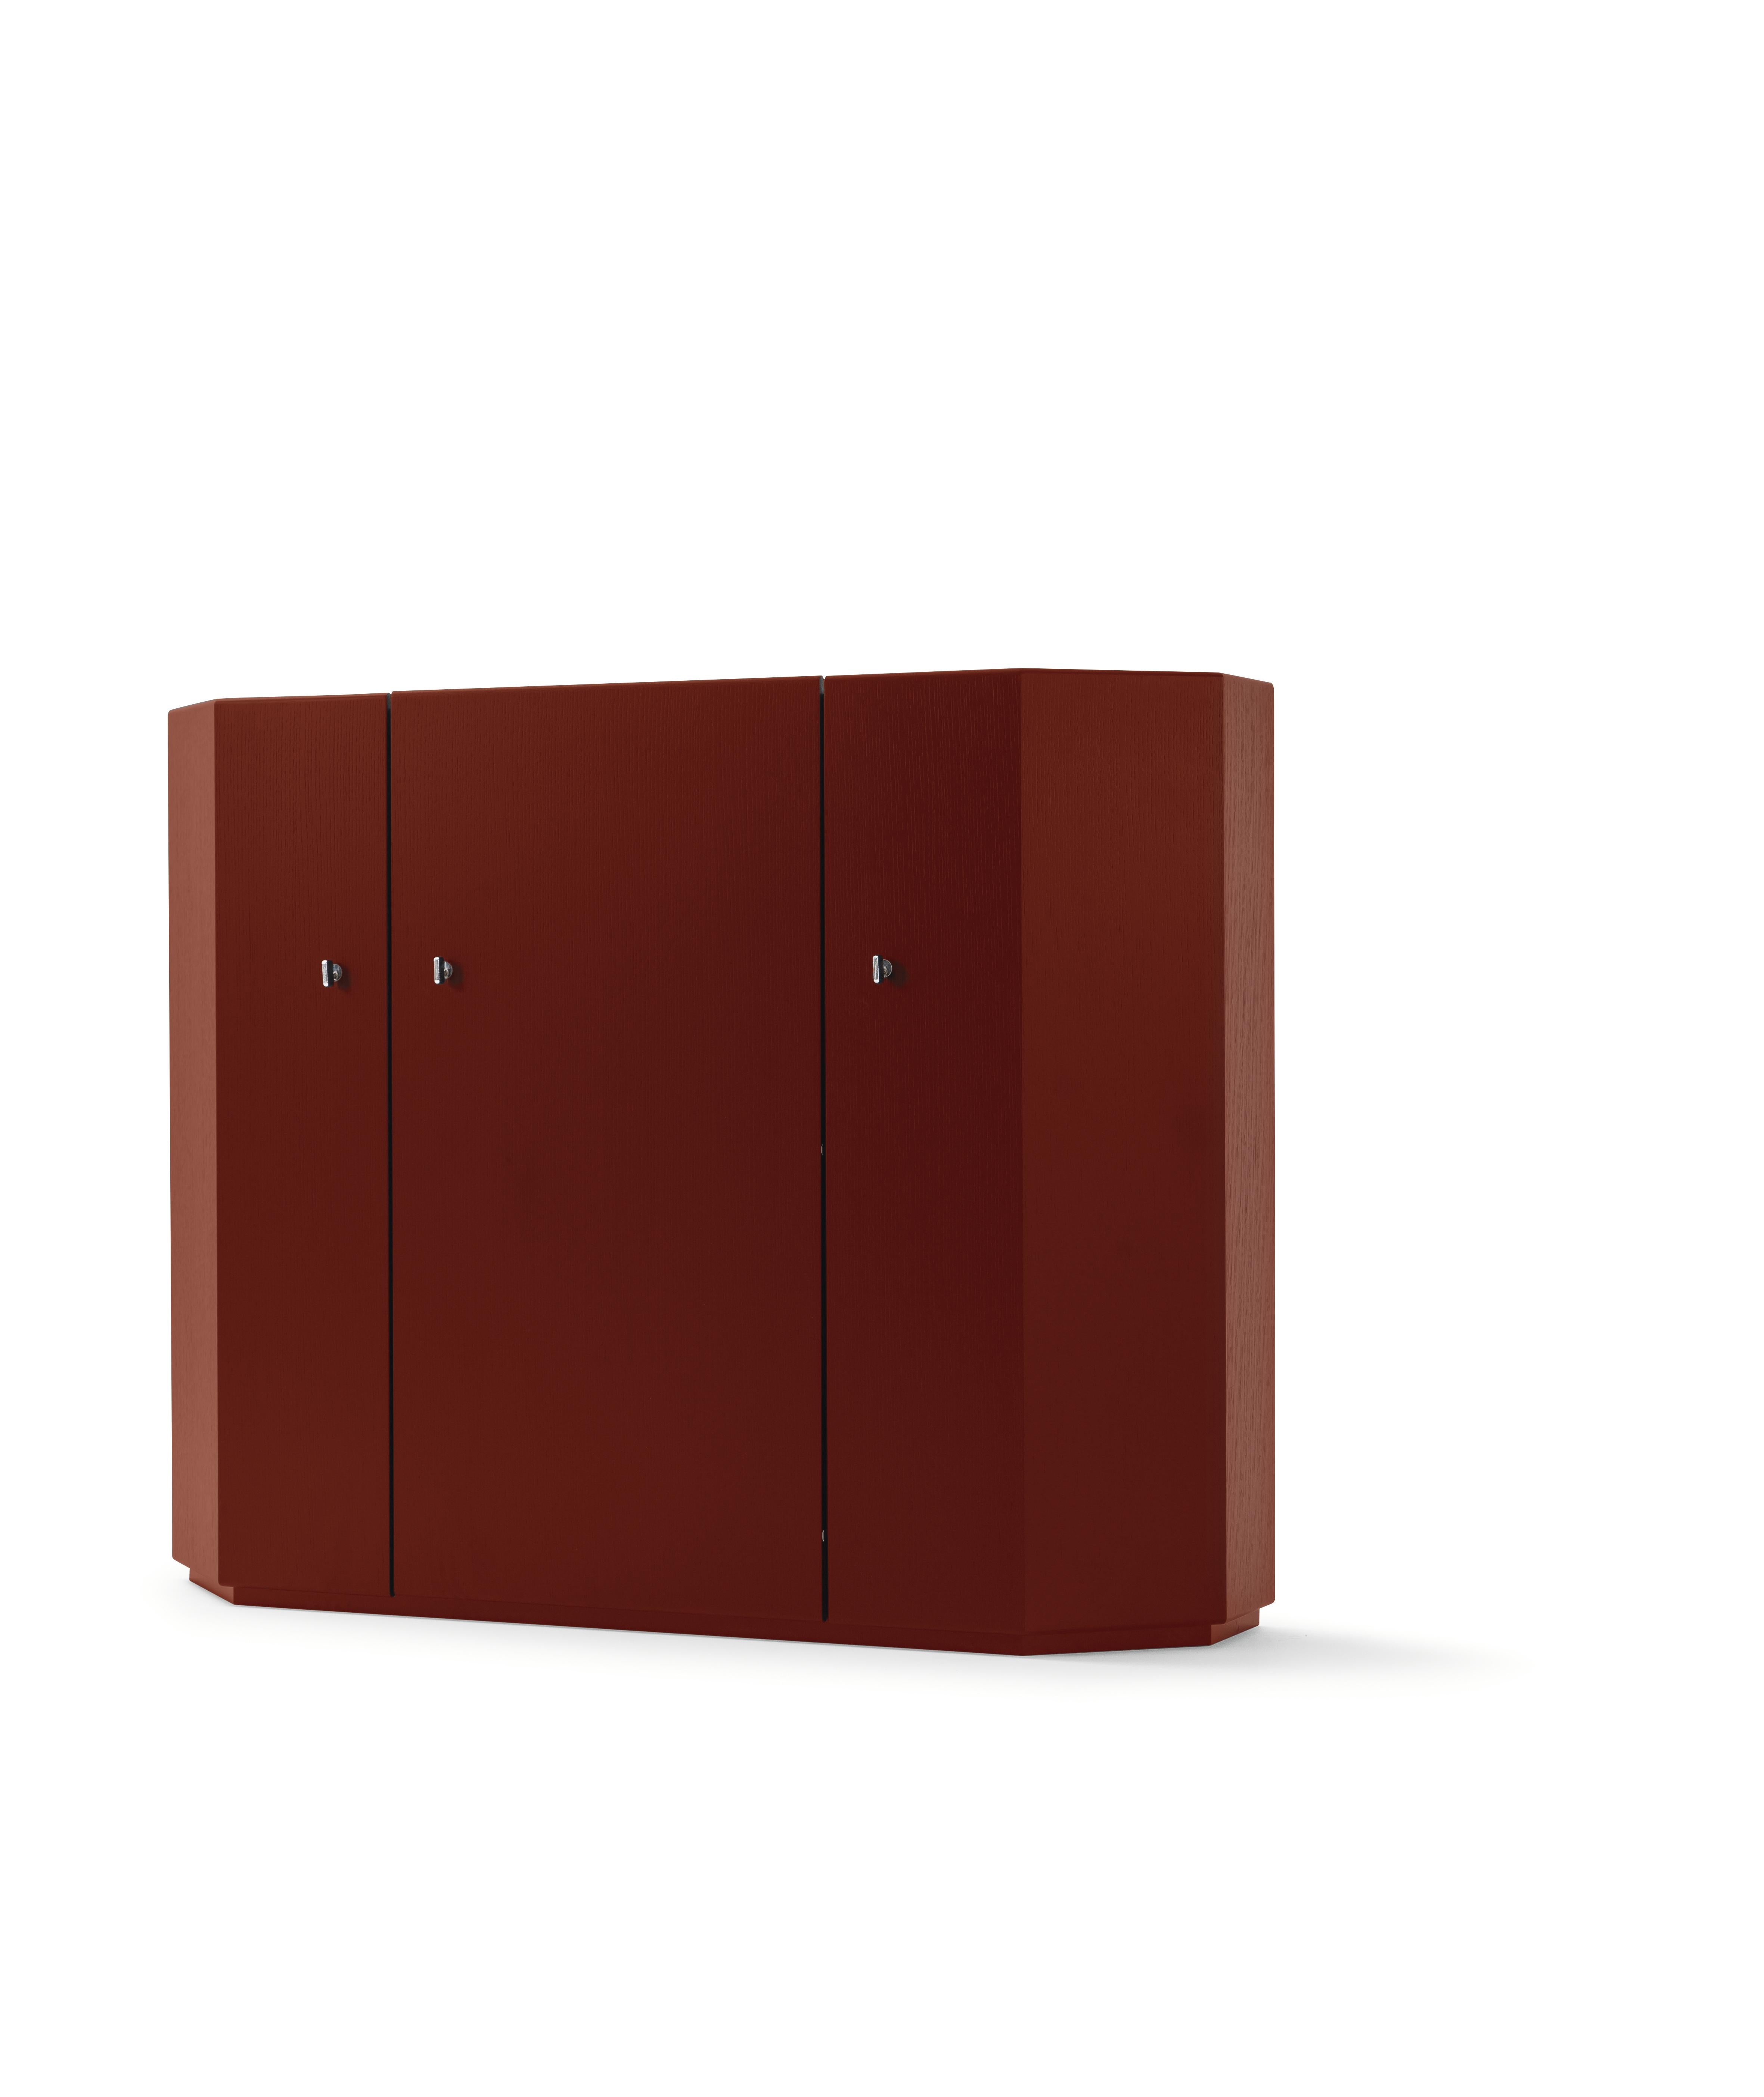 Bramante Storage Cabinet by Japanese Architect Kazuhide Takahama for Cassina

A storage unit with modern lines, although of classical inspiration, that becomes the emblem of the Ultrarazionale collection, in this case an example of ancient